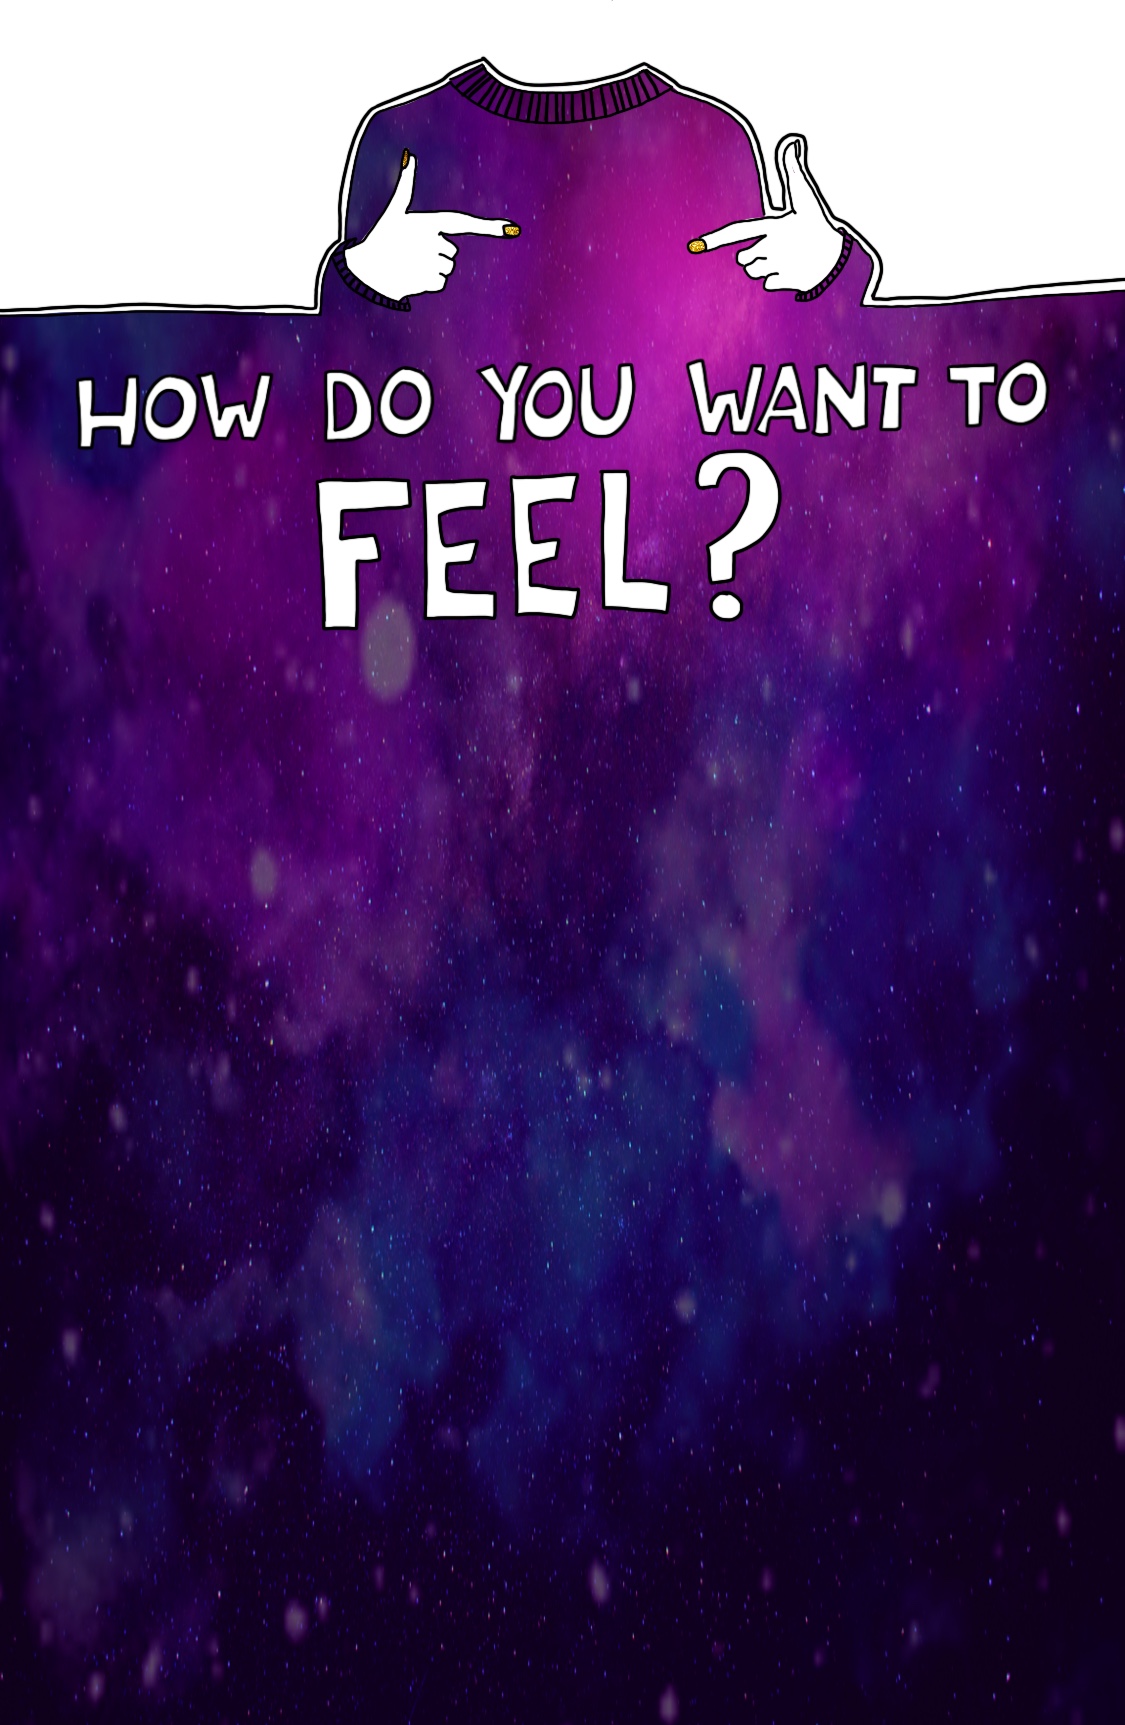 Journal Prompt: How do you want to feel?